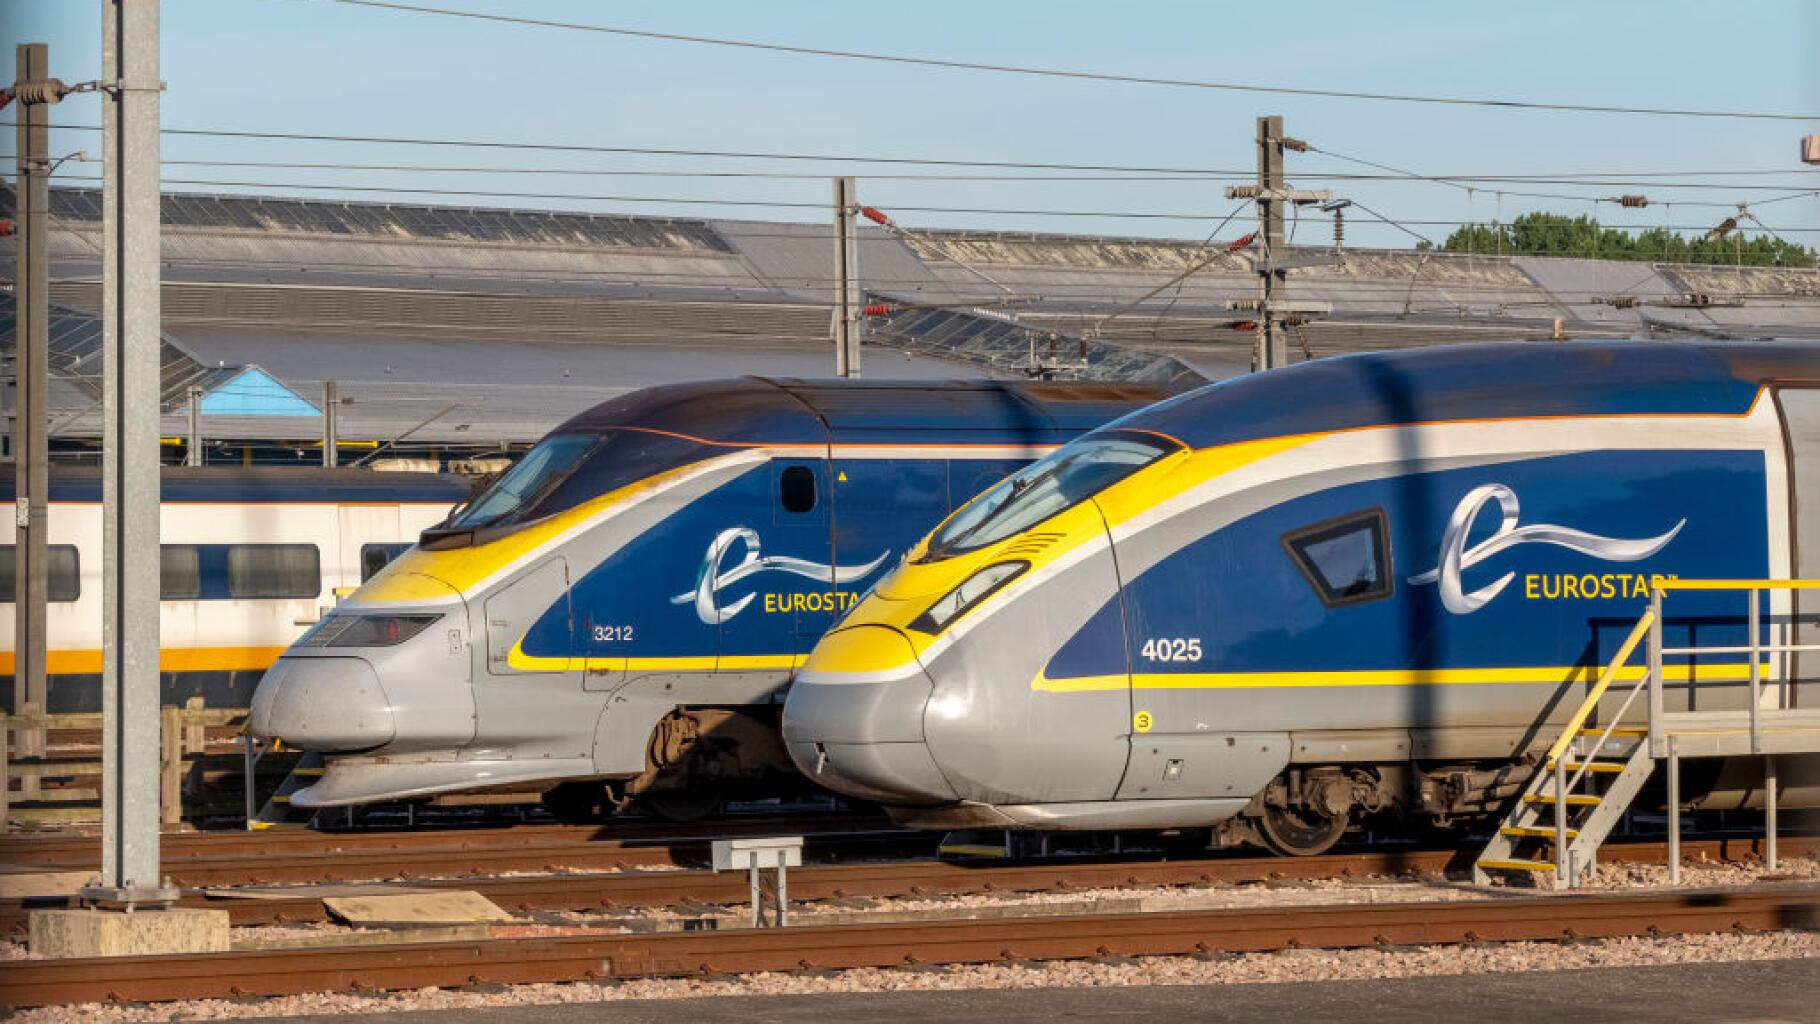 In the United Kingdom, Eurostar trains were canceled following strike action on Monday